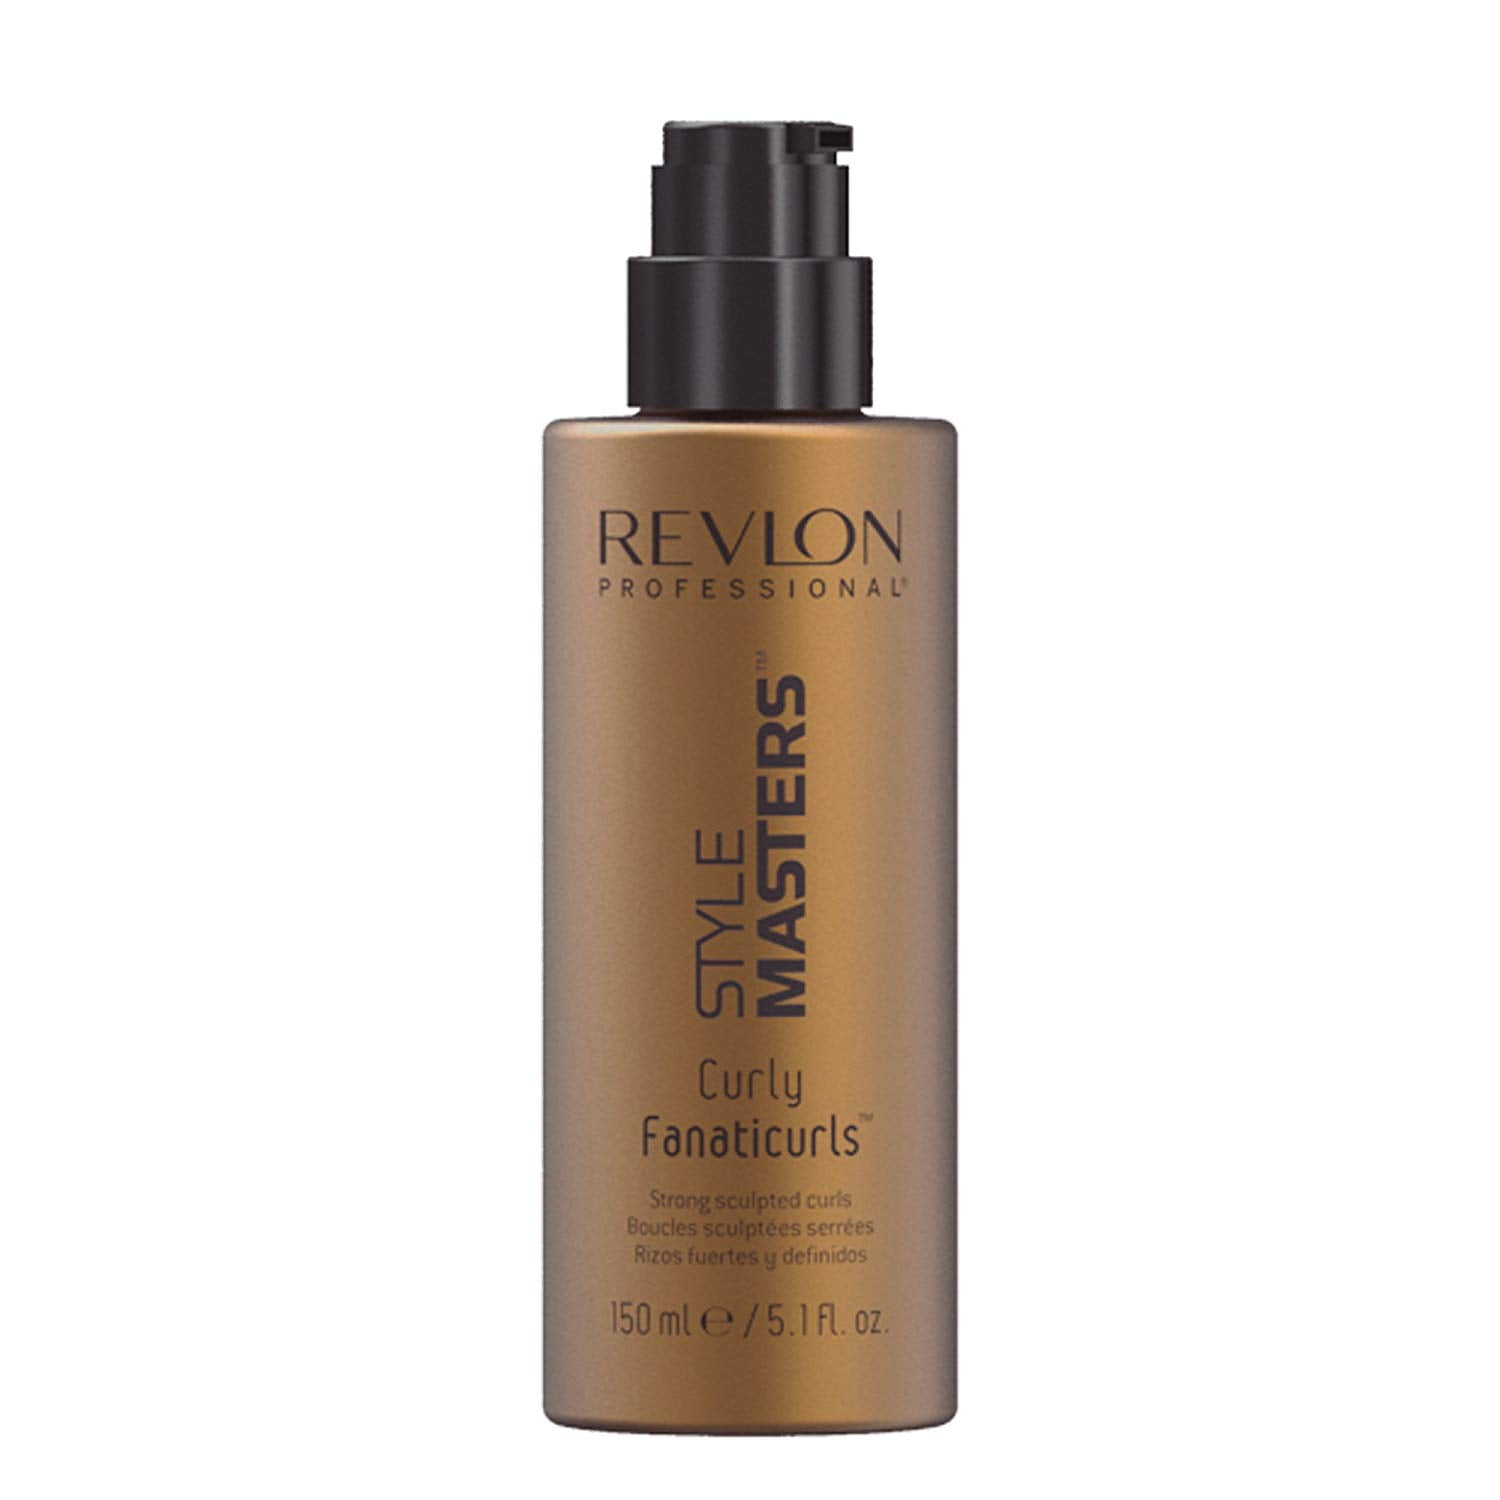 STYLE MASTERS strong sculpted curls 150 ml by Revlon | Walmart Canada